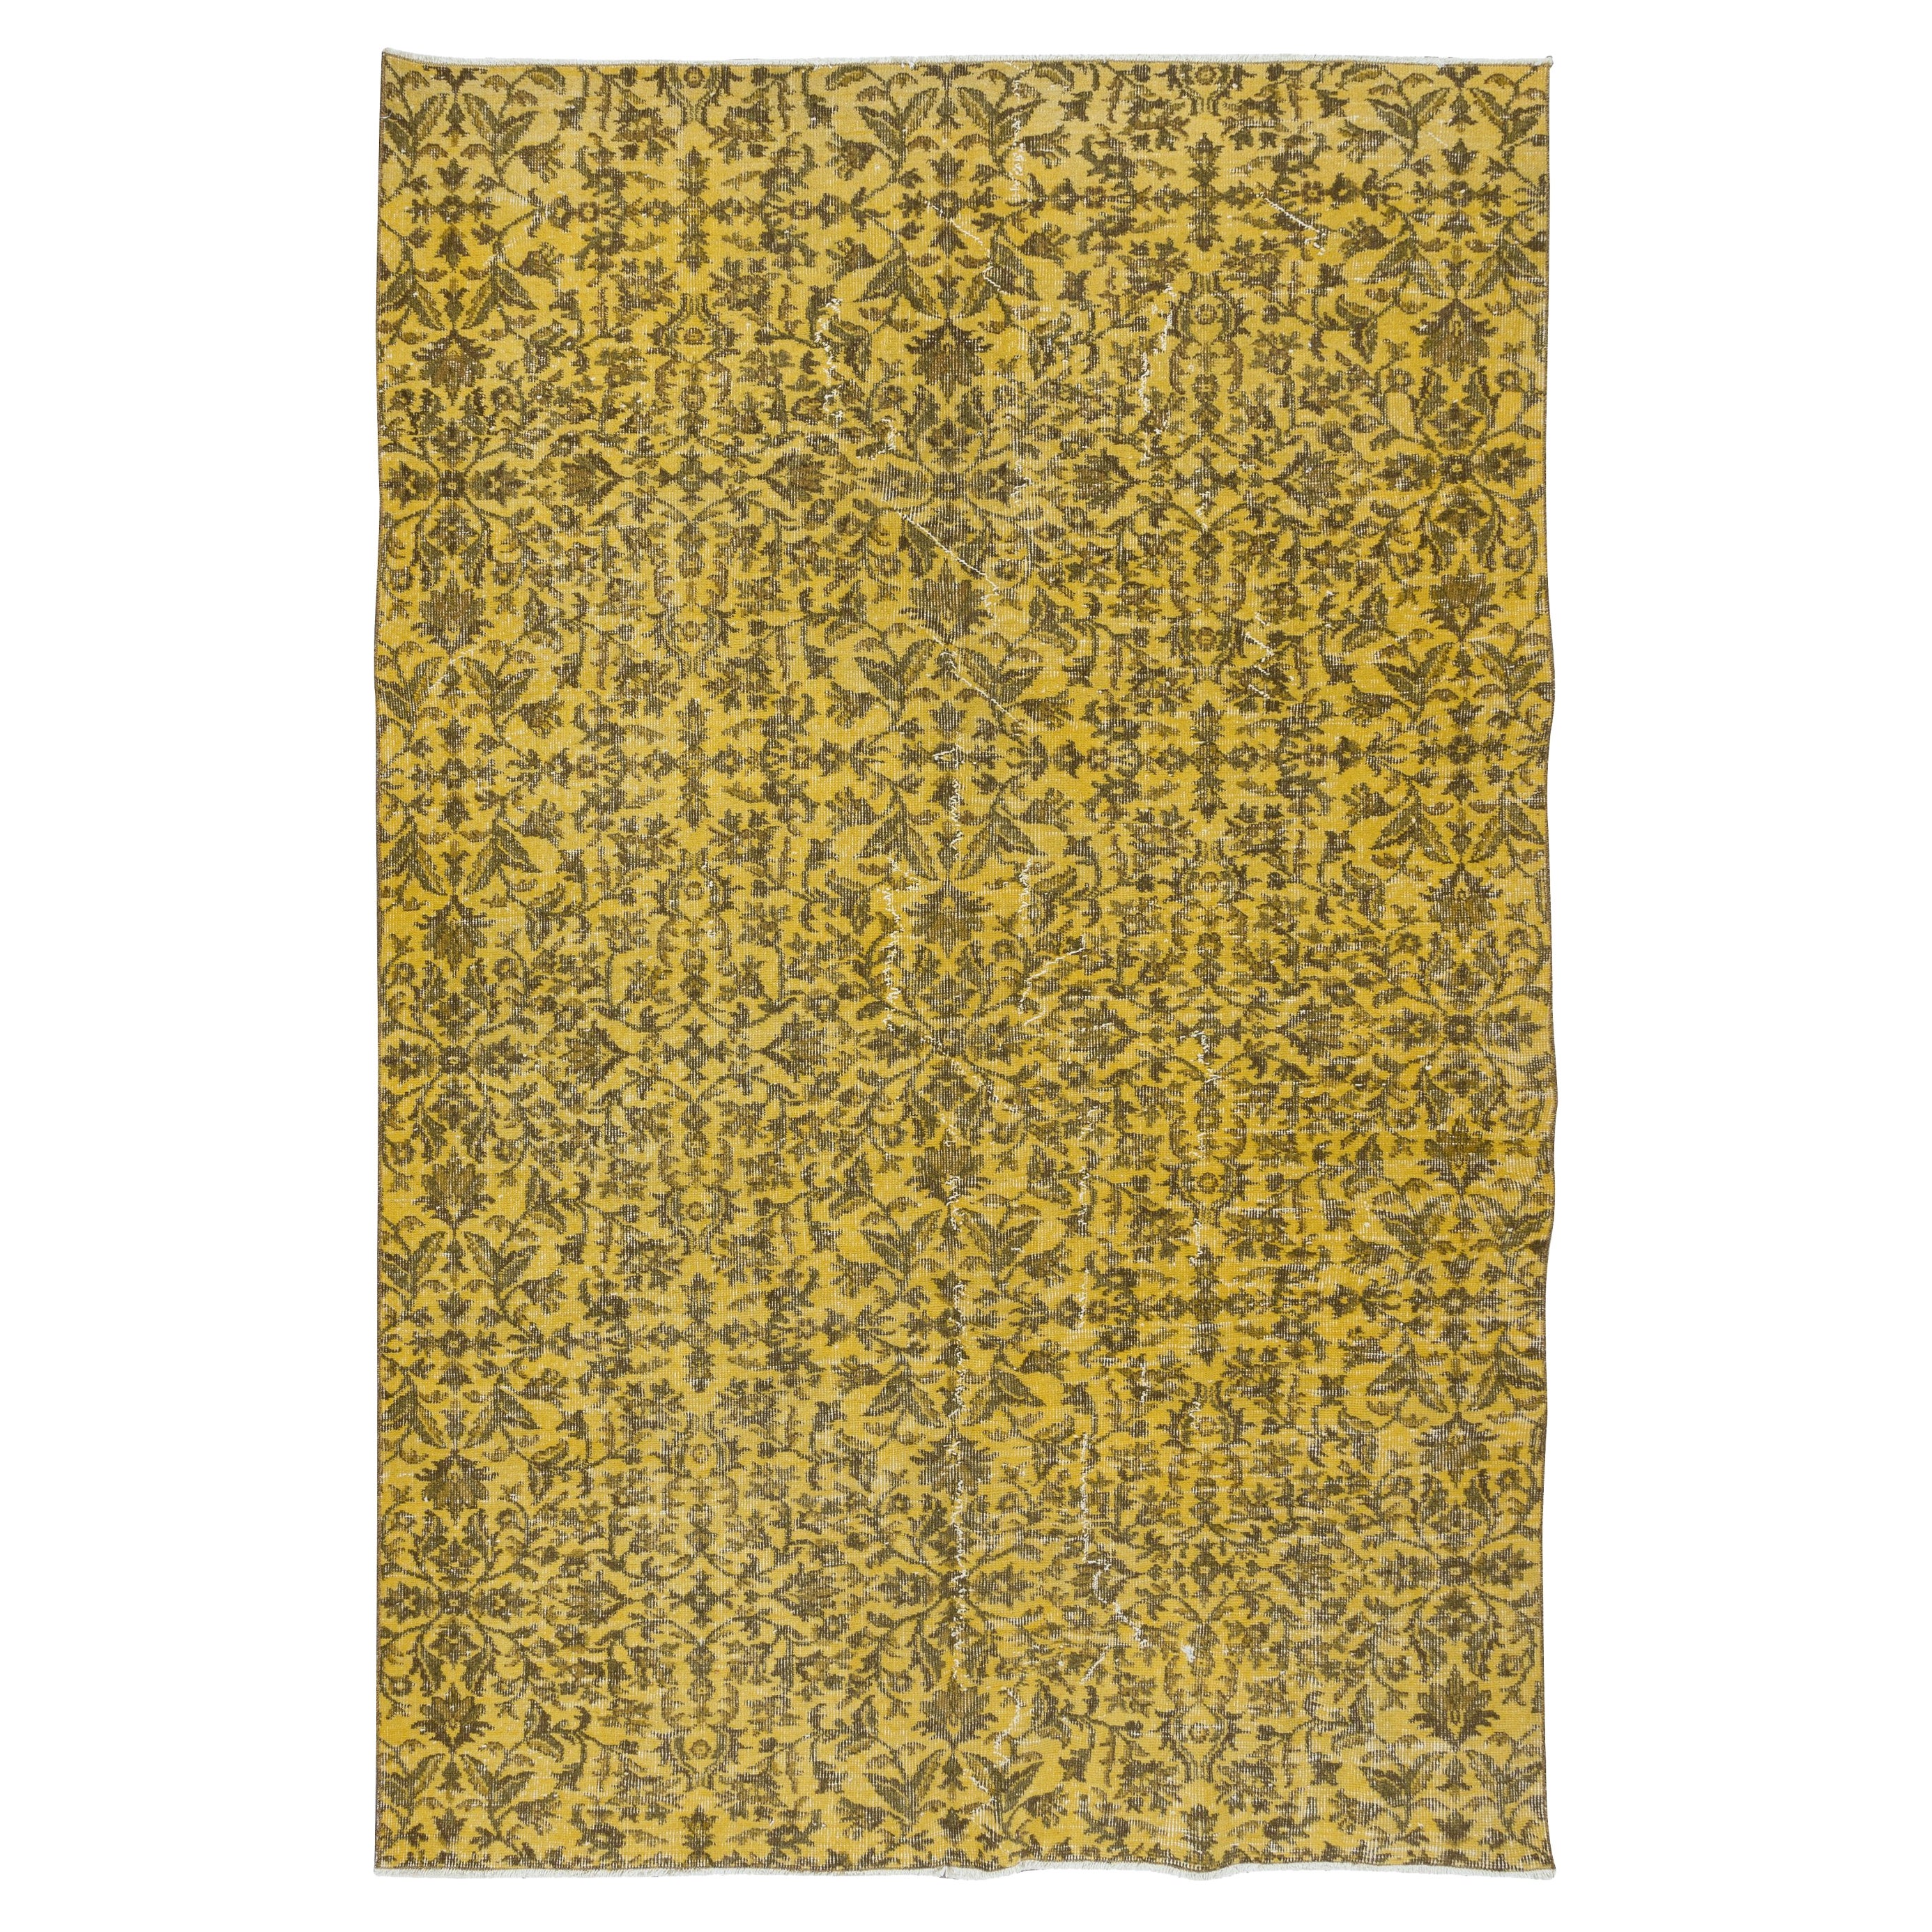 6x9 Ft Modern Handmade Turkish Area Rug with Brown Florals & Yellow Background